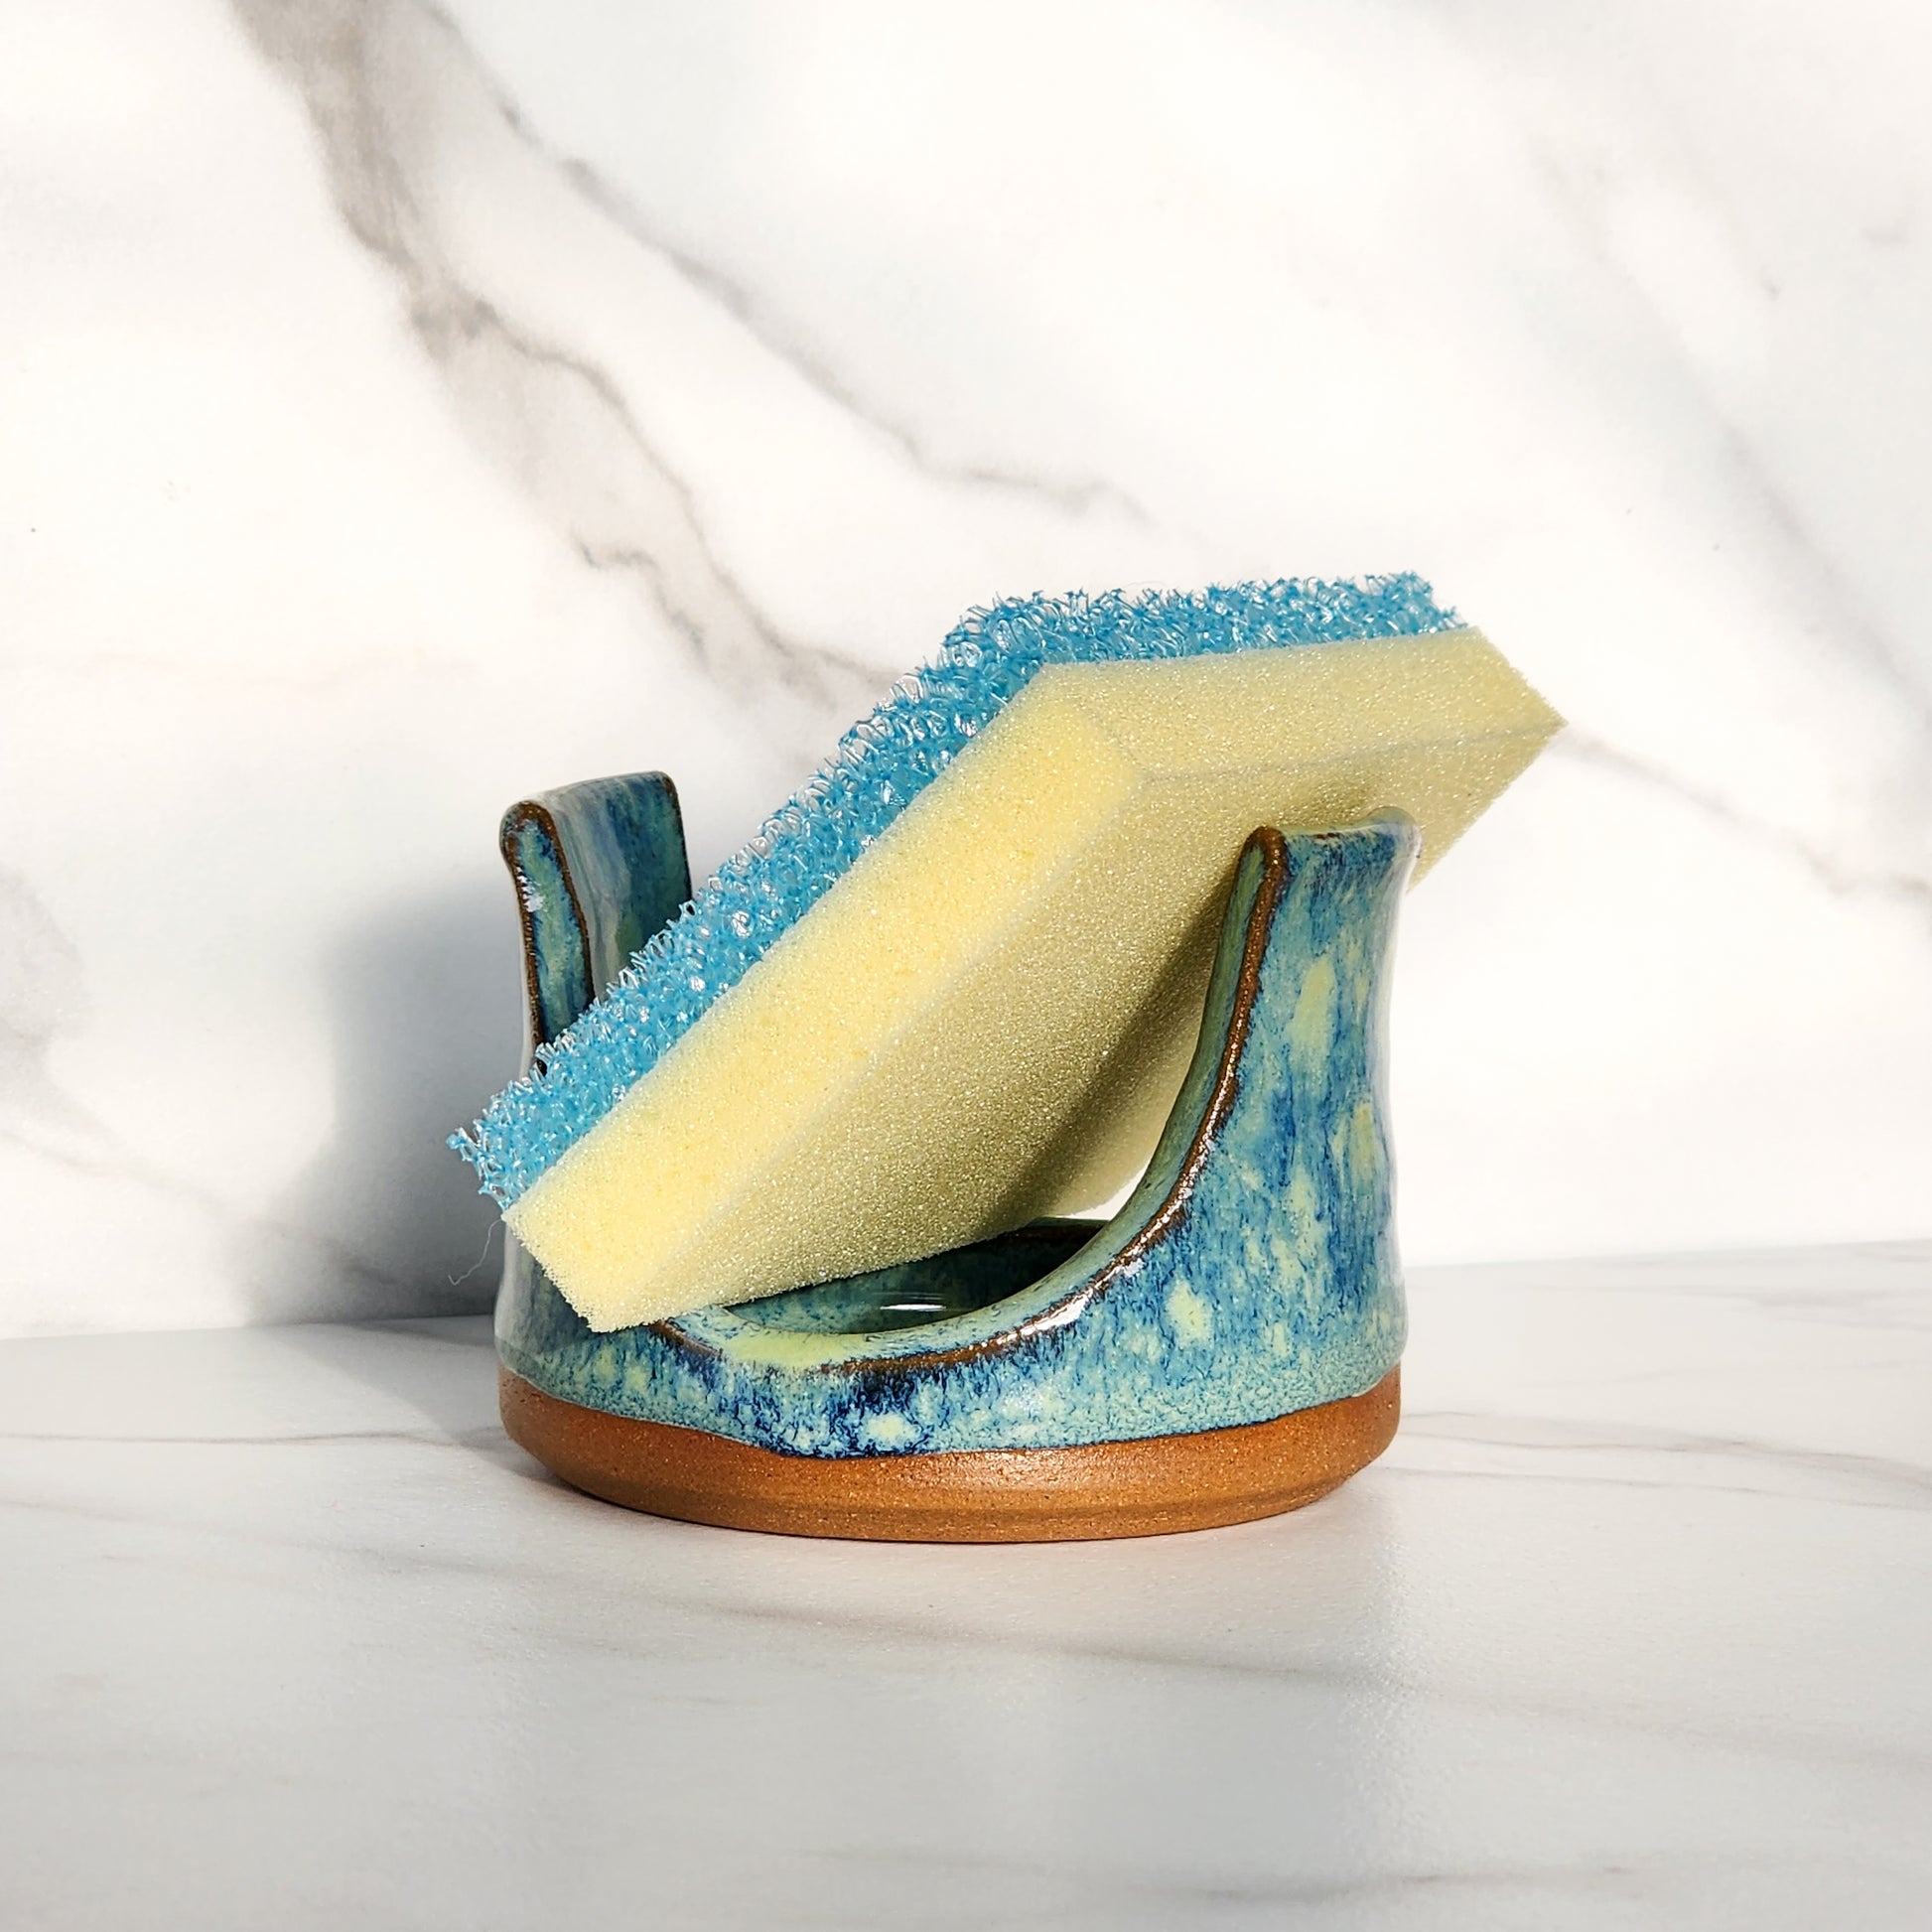  Image: Clinton Pottery's Handmade Sponge Holder in Starry Night – An enchanting and practical kitchen accessory, expertly crafted by artisans. This durable stoneware holder, in mesmerizing Starry Night, adds a touch of celestial beauty to your kitchen, reminiscent of Van Gogh's masterpiece. Designed to securely hold your sponge and prevent water spread, it keeps your counters and sink area tidy. 